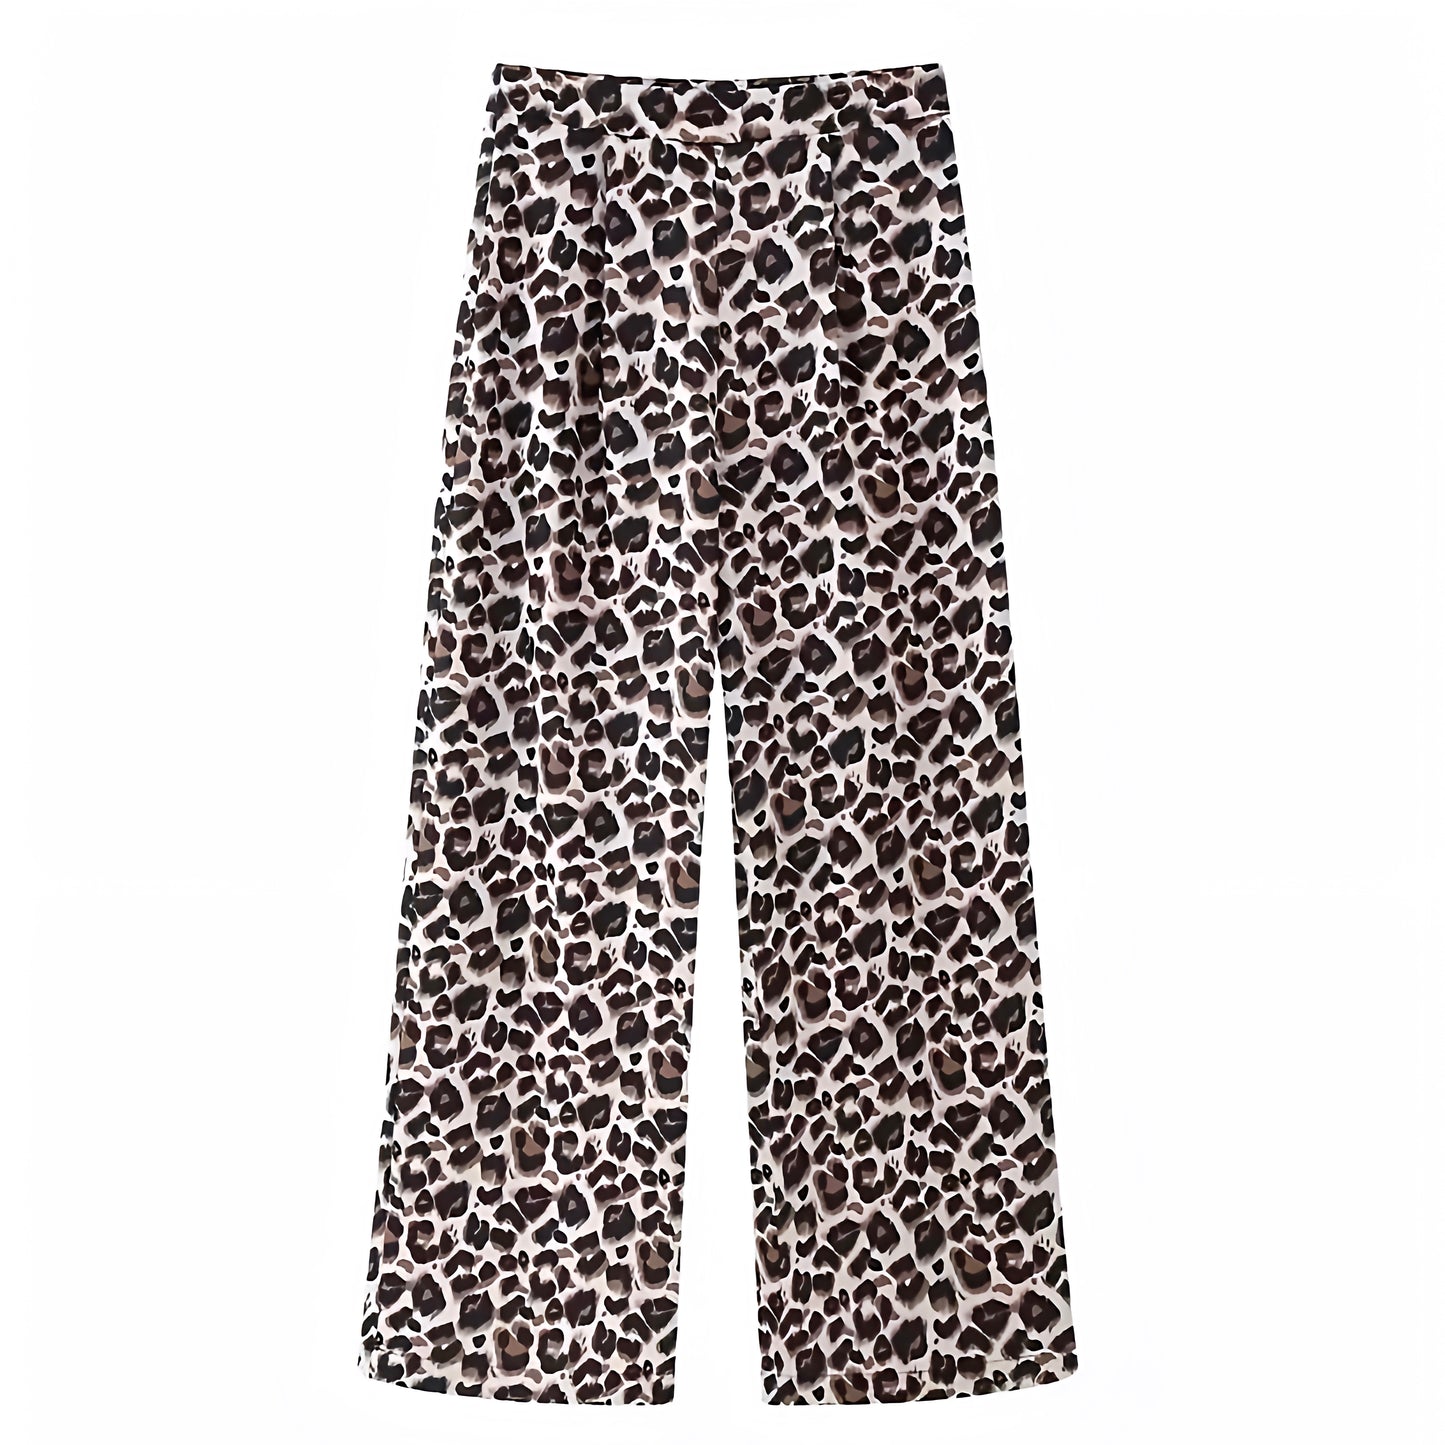 leopard-cheetah-animal-print-patterned-brown-black-white-vintage-pleated-mid-high-rise-waist-wide-stright-leg-vintage-trouser-pants-with-pockets-women-ladies-chic-trendy-spring-2024-summer-elegant-casual-feminine-party-date-night-out-sexy-club-wear-y2k-style-zara-revolve-aritzia-white-fox-princess-polly-babyboo-iamgia-edikted